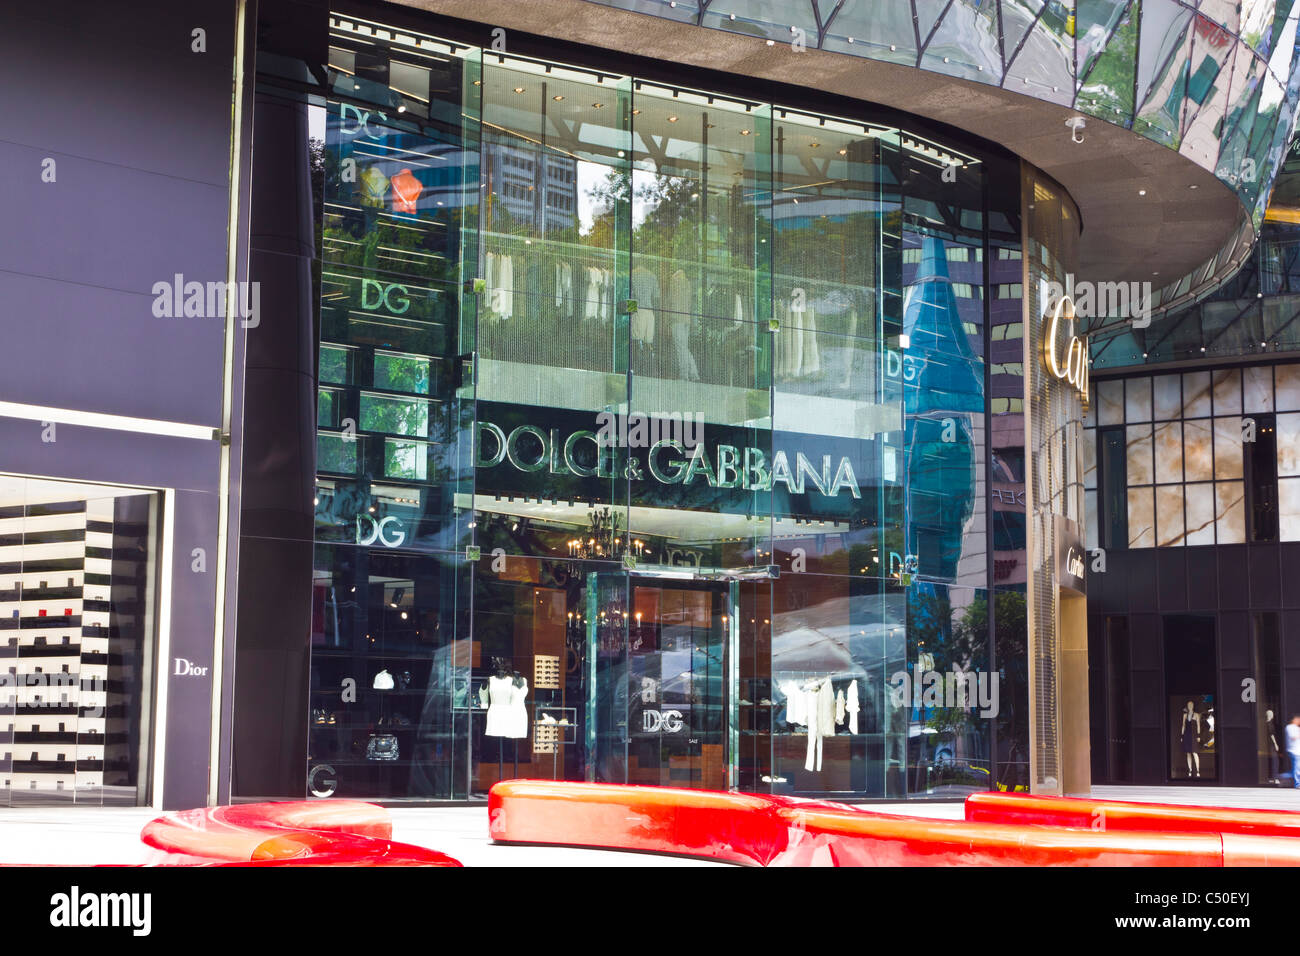 Dolce & Gabbana's shop next to Dior in Singapore's ION Shopping Centre Stock Photo